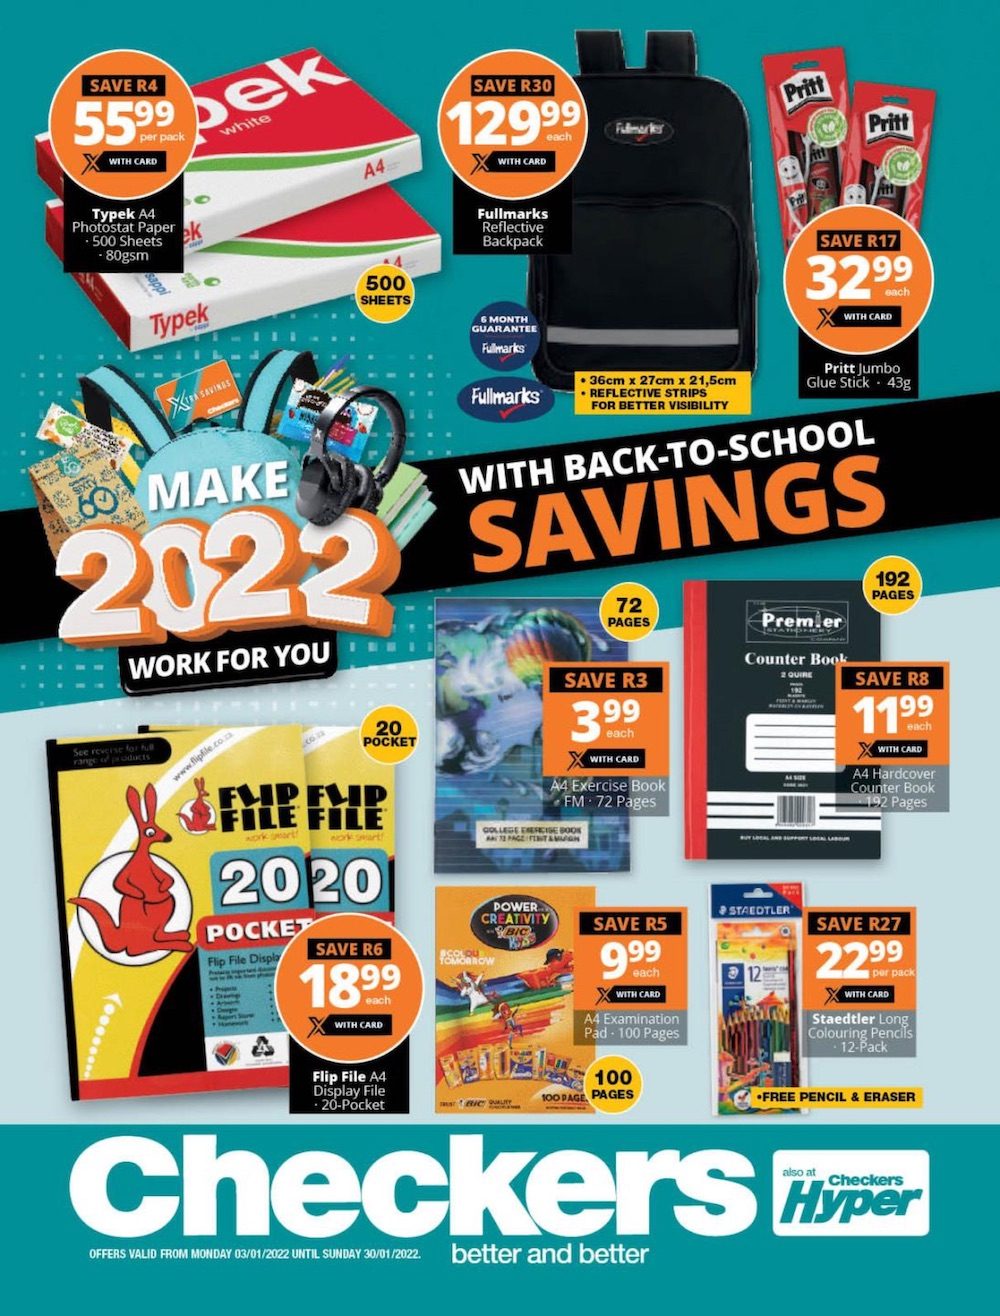 checkers-specials-back-to-school-2022-checkers-catalogue-xtra-sale